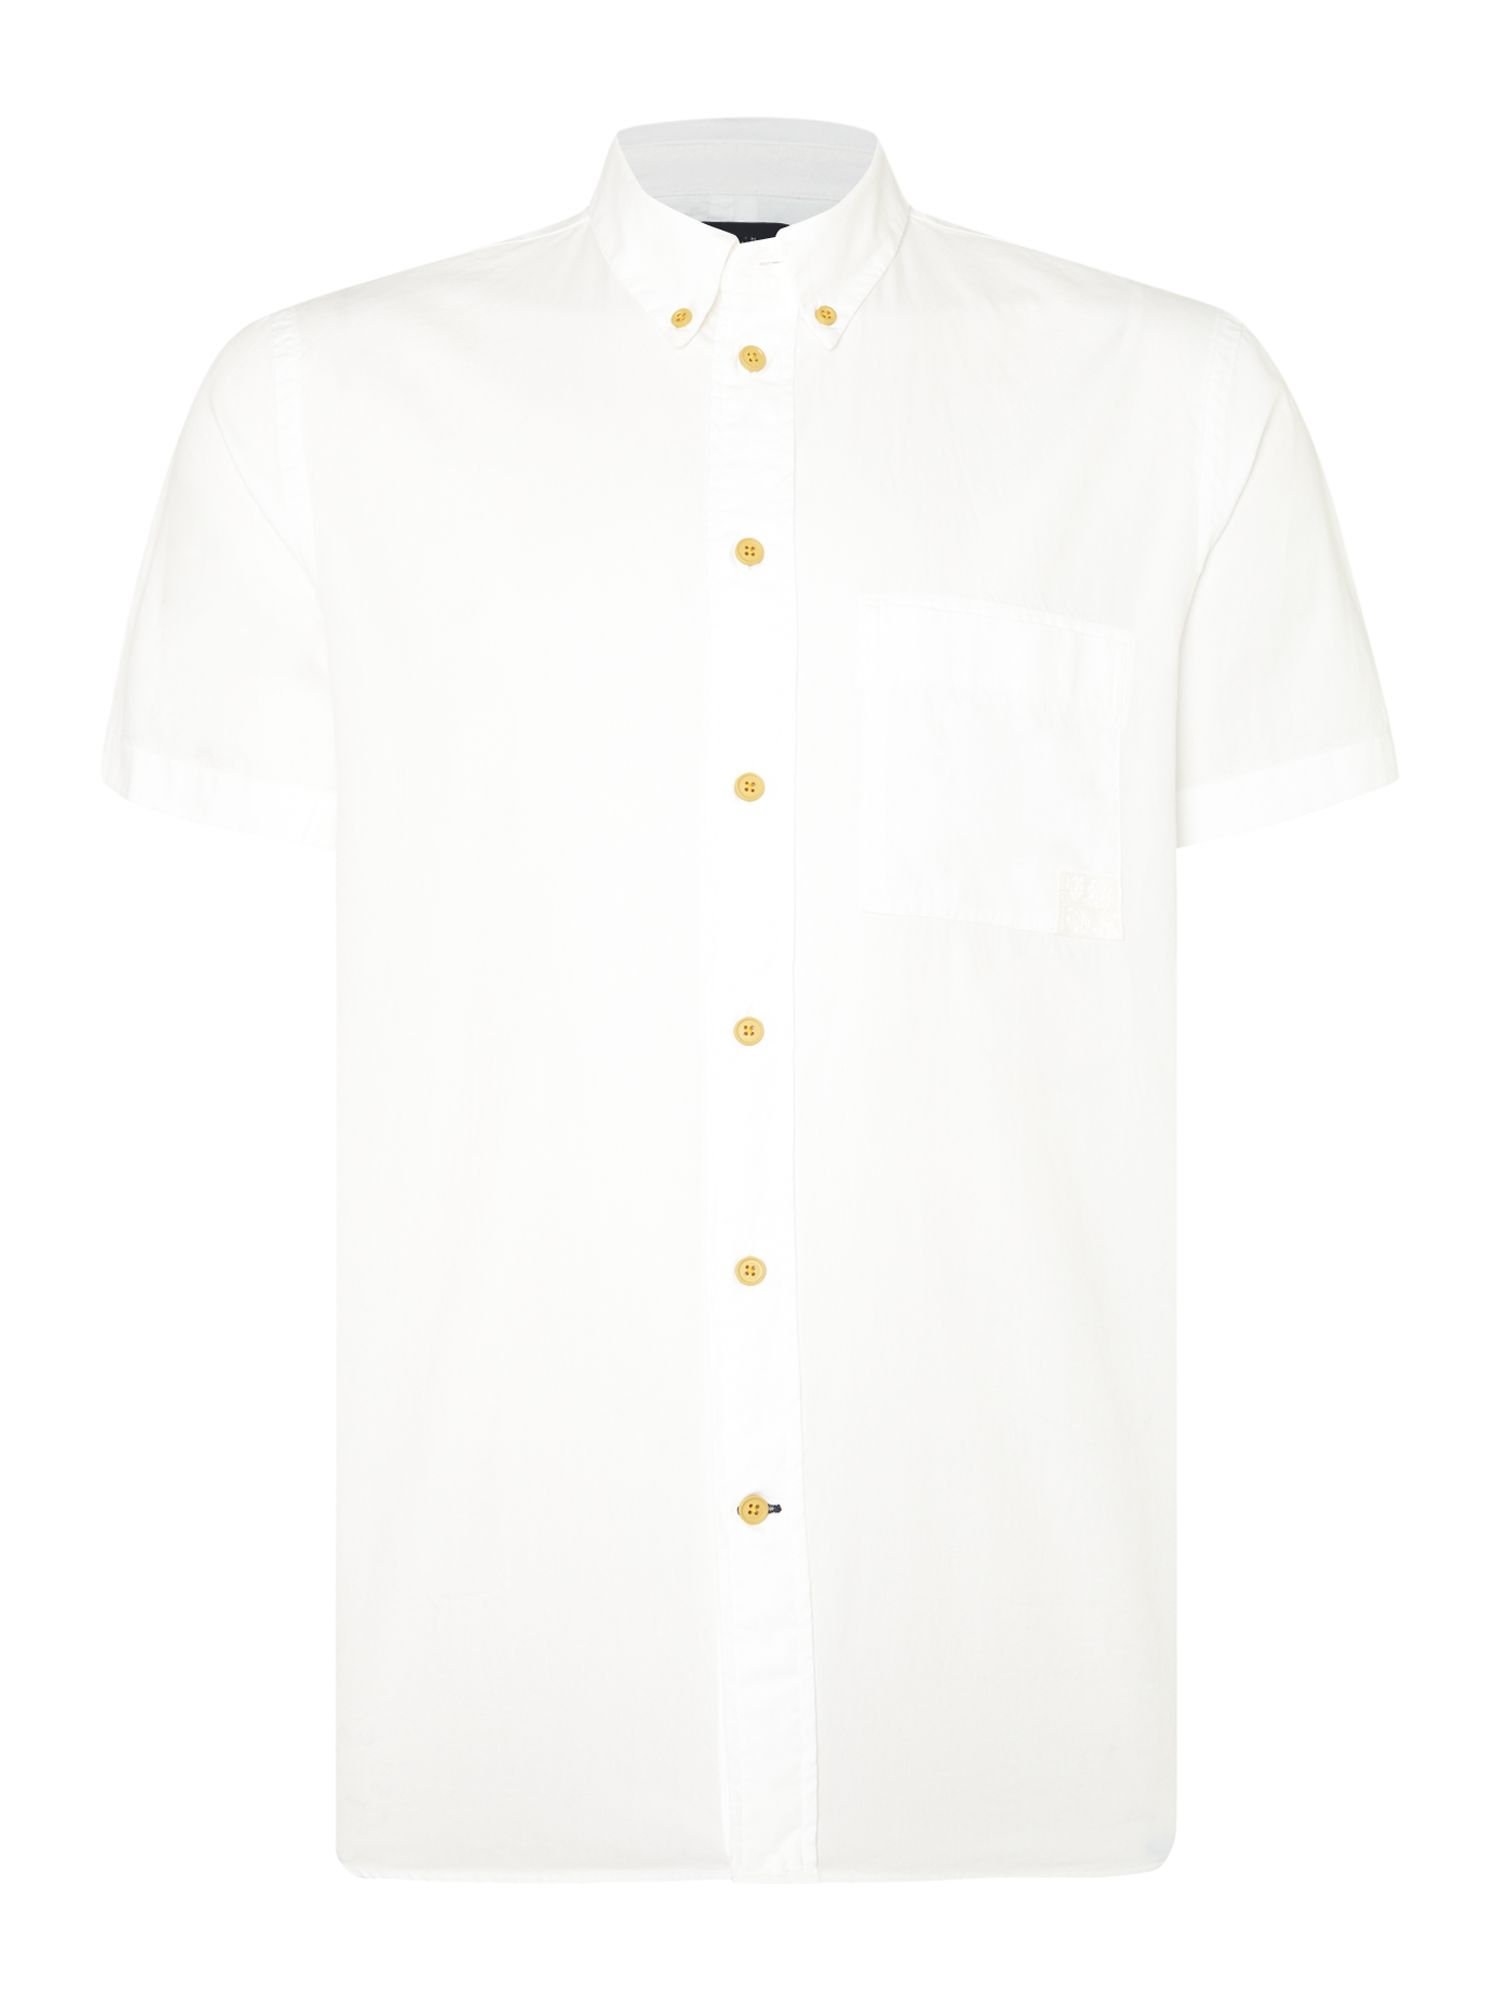 Paul smith Plain Classic Fit Short Sleeve Button Down Shirt in White